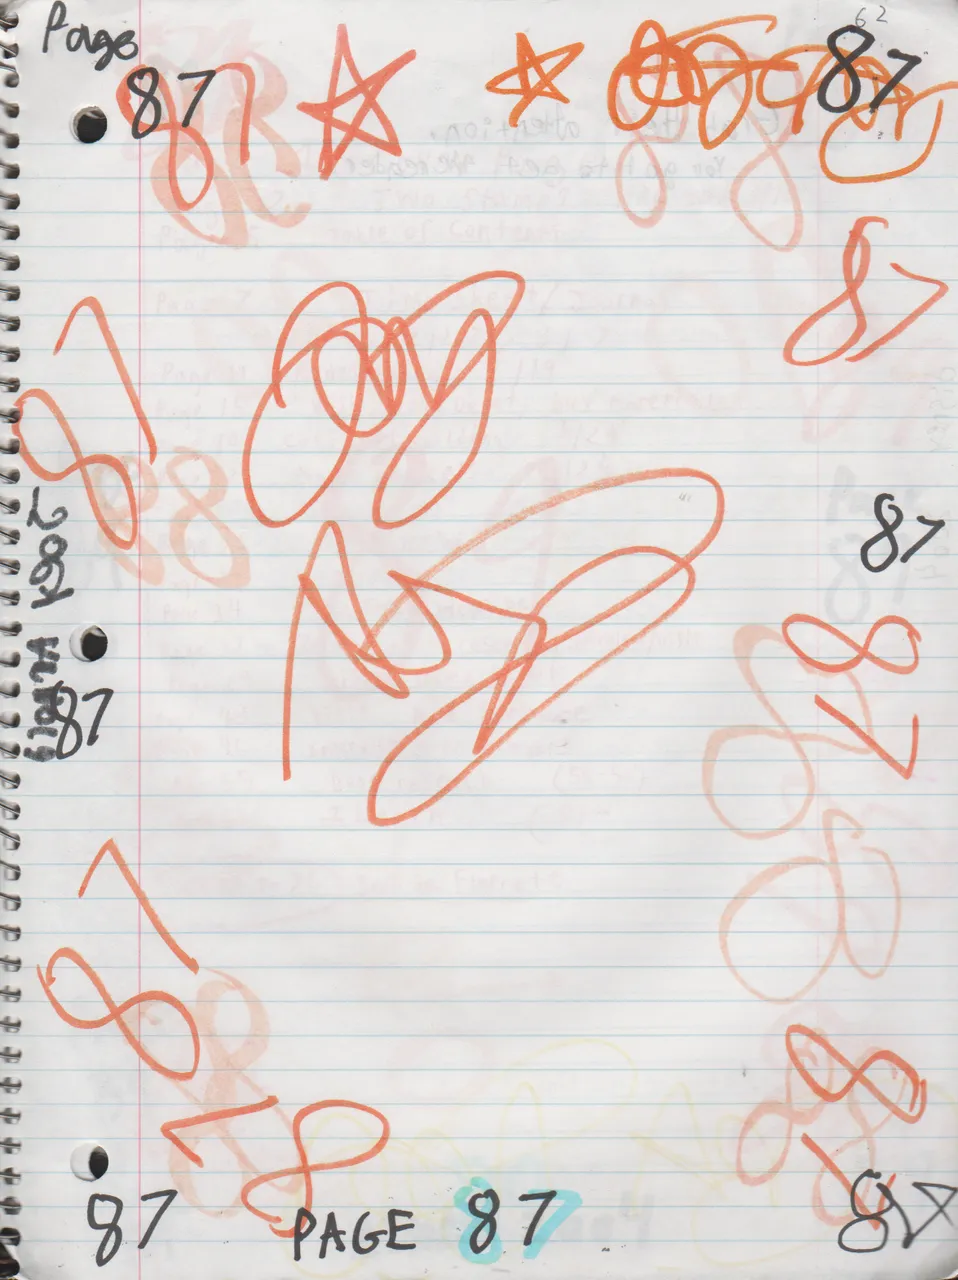 2004-01-29 - Thursday - Carpetball FGHS Senior Project Journal, Joey Arnold, Part 02, 96pages numbered, Notebook-85.png